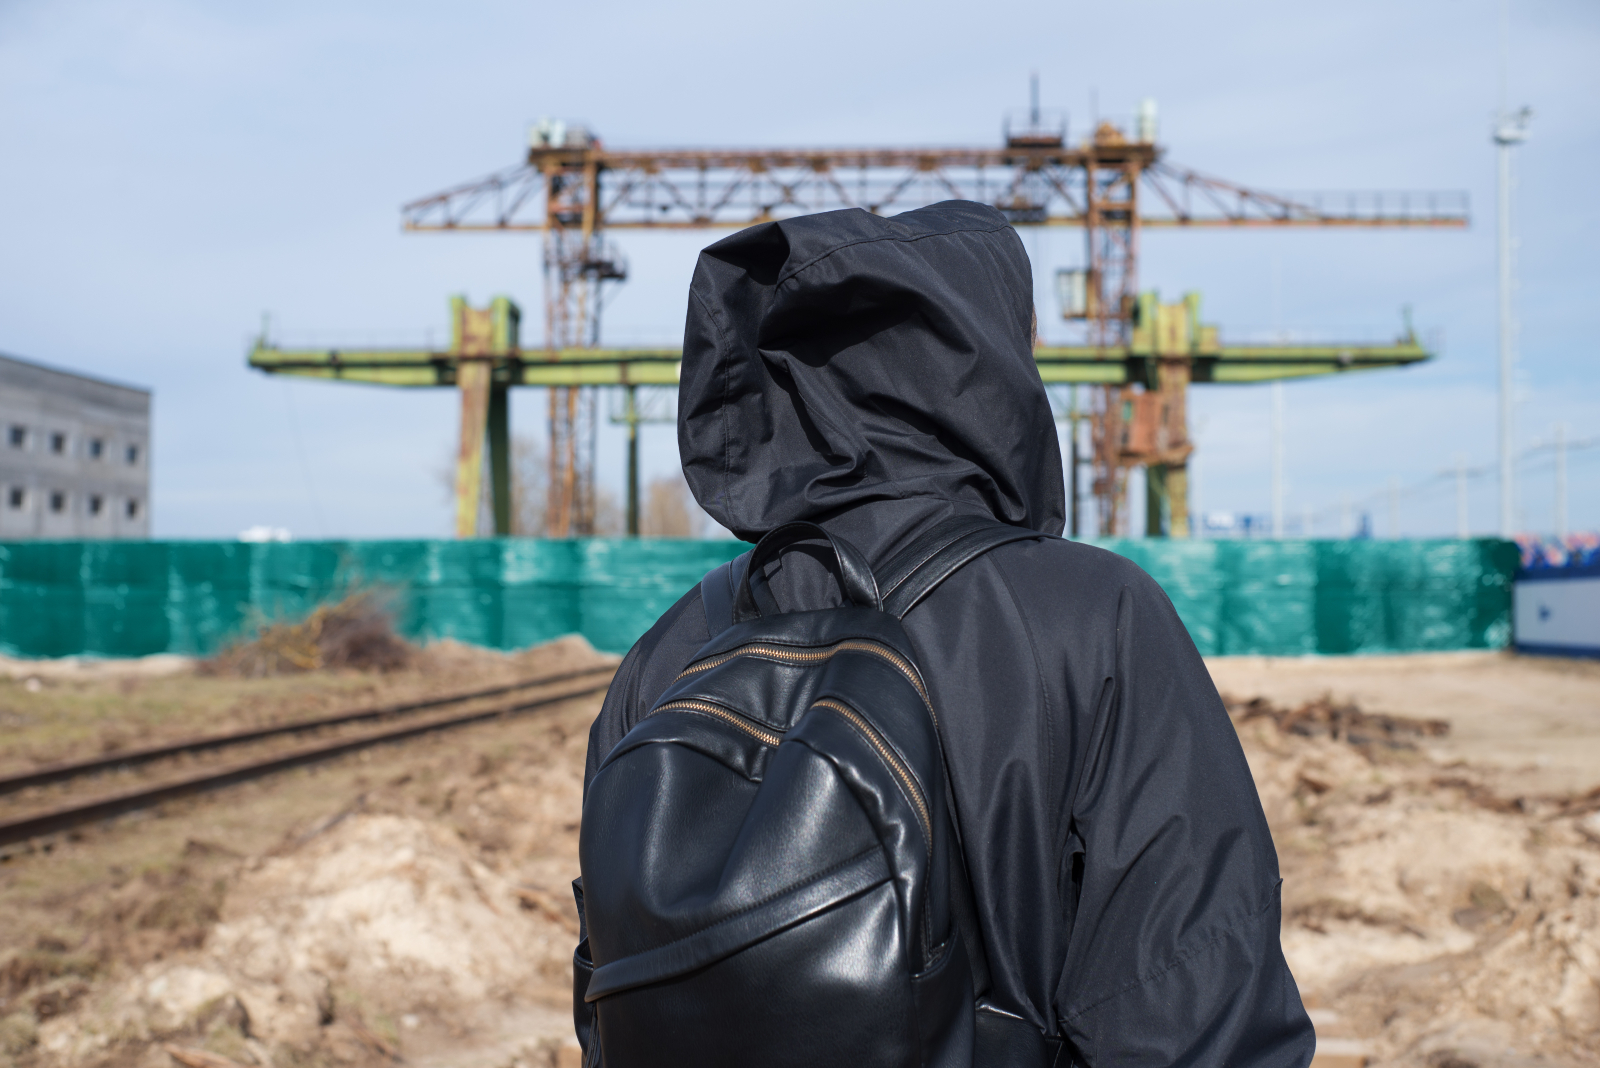 Back view of a man in dark clothing and carrying a bag with a construction site ahead of him